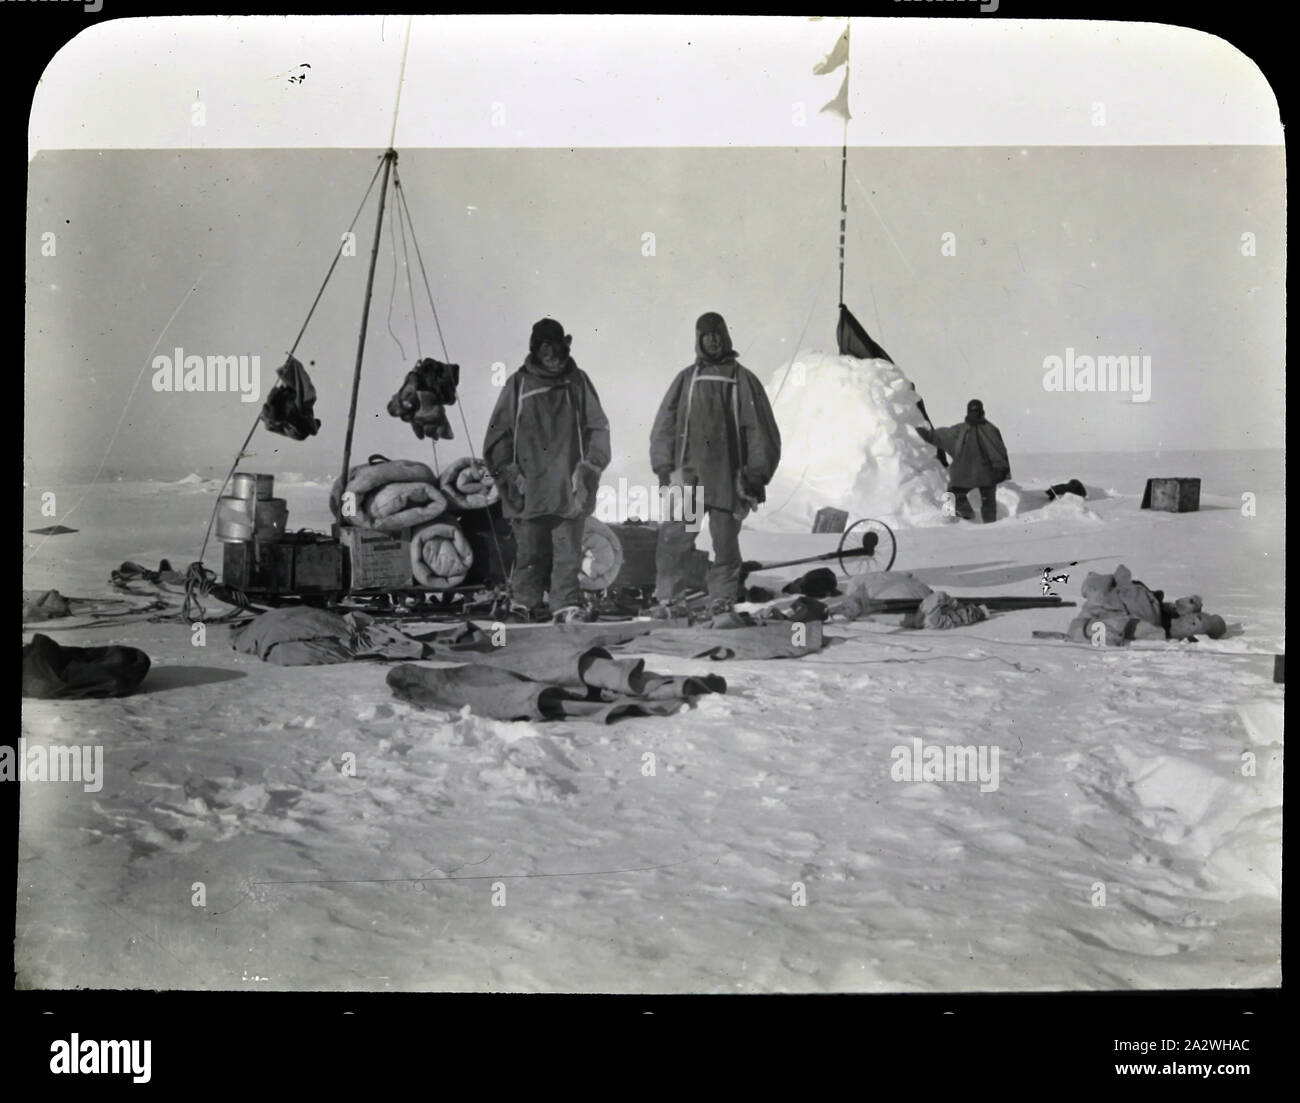 Lantern Slide - British Imperial Antarctic Expedition, Adams, Wild, Shackleton at Campsite, Antarctica, Jan 1909, Photograph depicting members of the British Imperial Antarctic Expedition, Jameson Adams, Frank Wild and Ernest Shackleton, at a supply depot in Antarctica on January 1909. The image was taken by Eric Marshall on their return journey from their farthest south position of 88º23'S Stock Photo